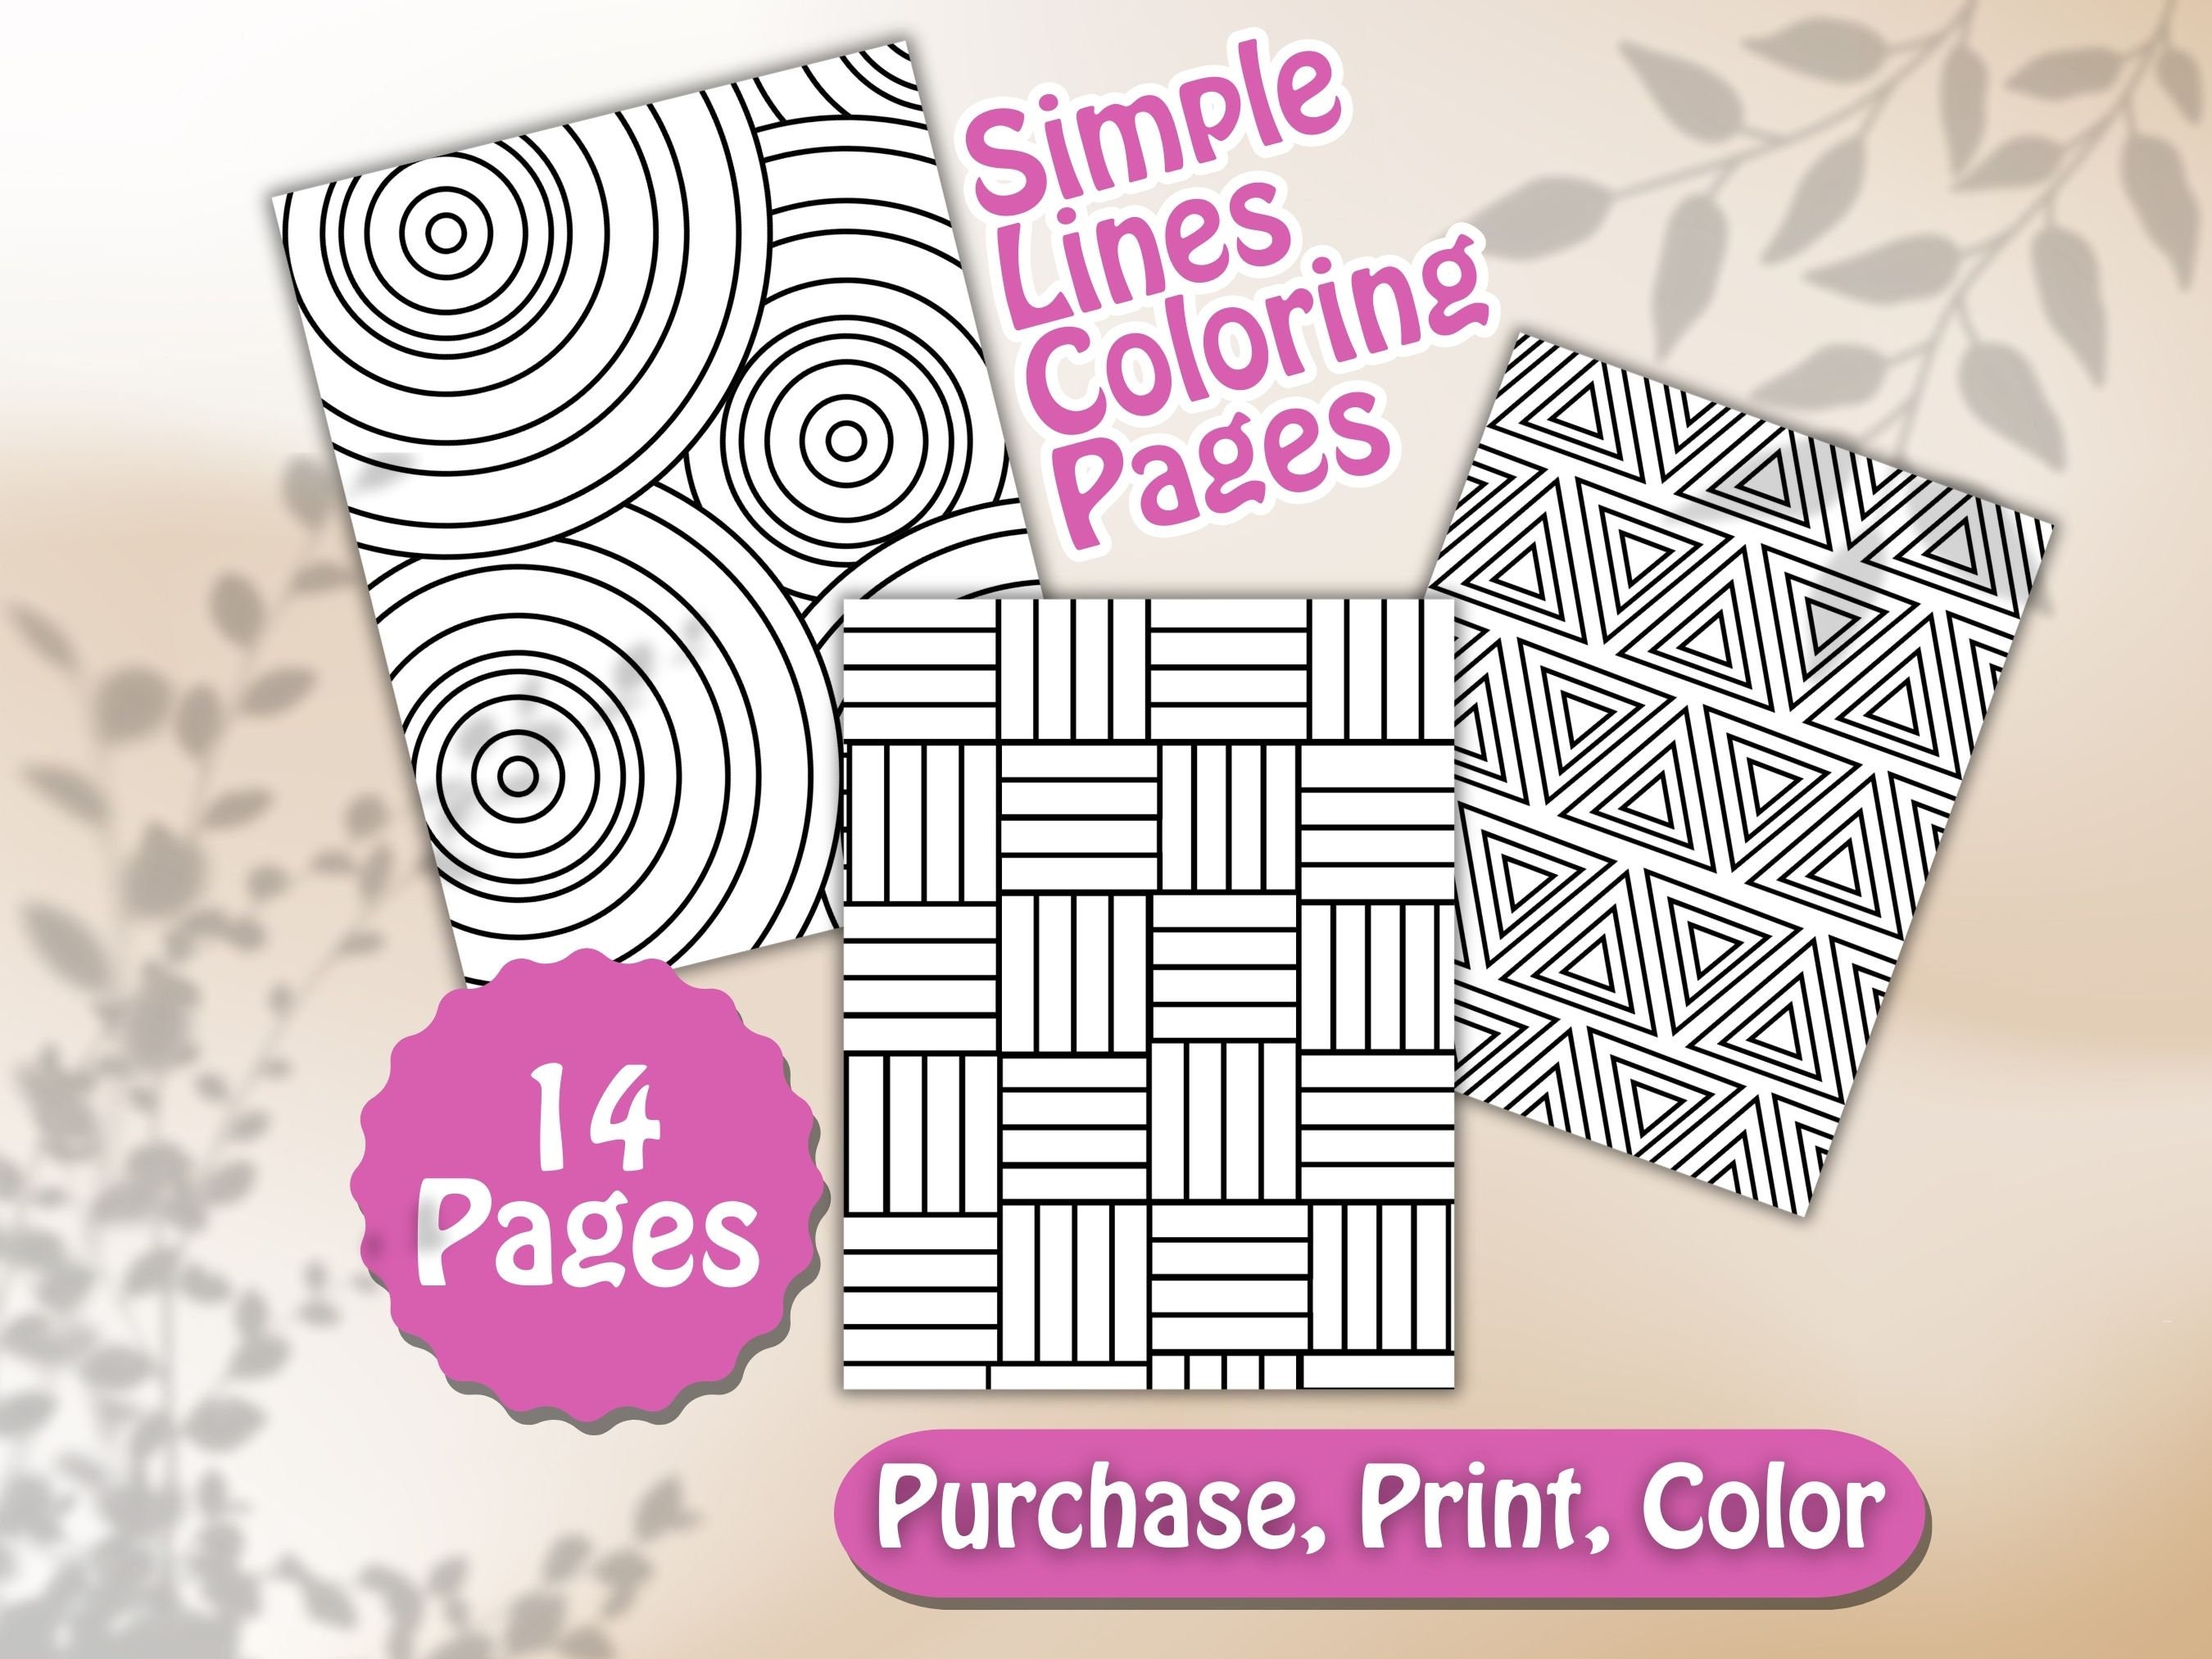 Pattern Coloring Book 3